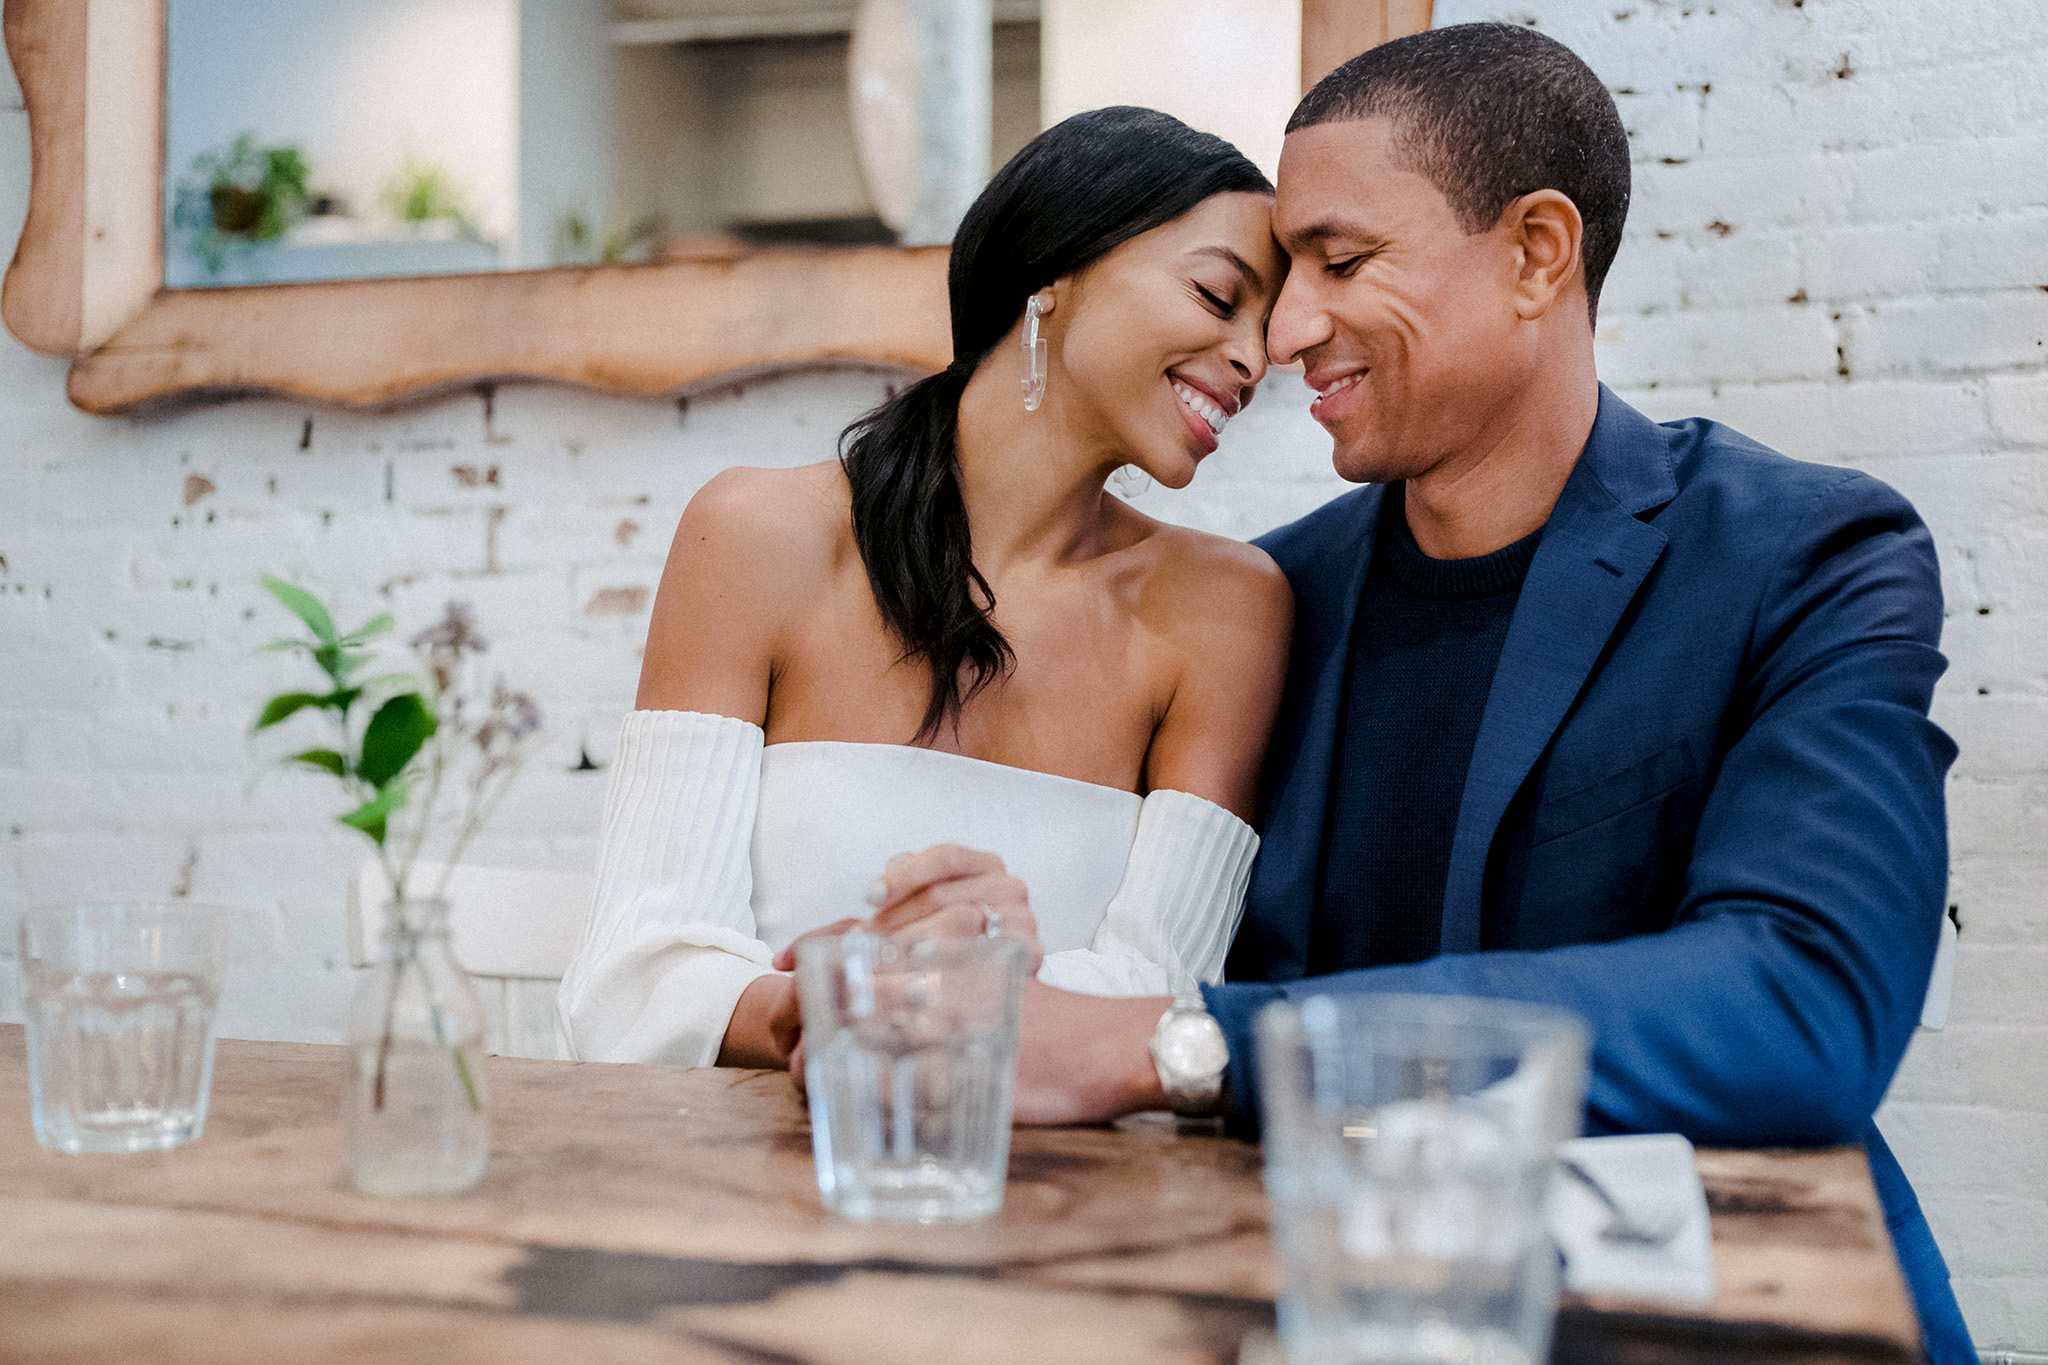 Bride and groom leaning into one another at a restaurant during their engagement session